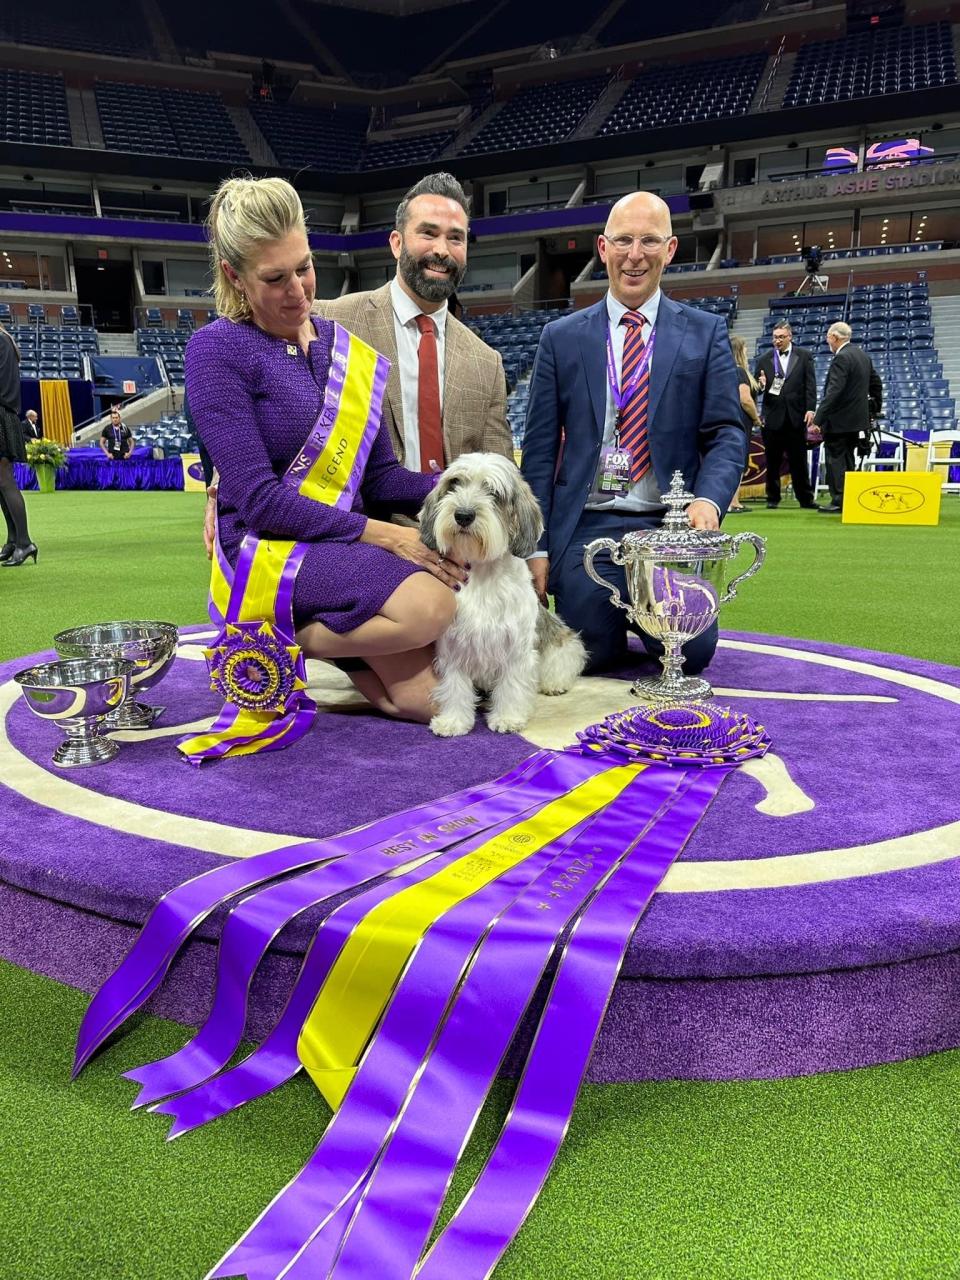 Buddy Holly, 2023 Westminster Dog Show champion, will be sworn in as canine mayor of Palm Springs.